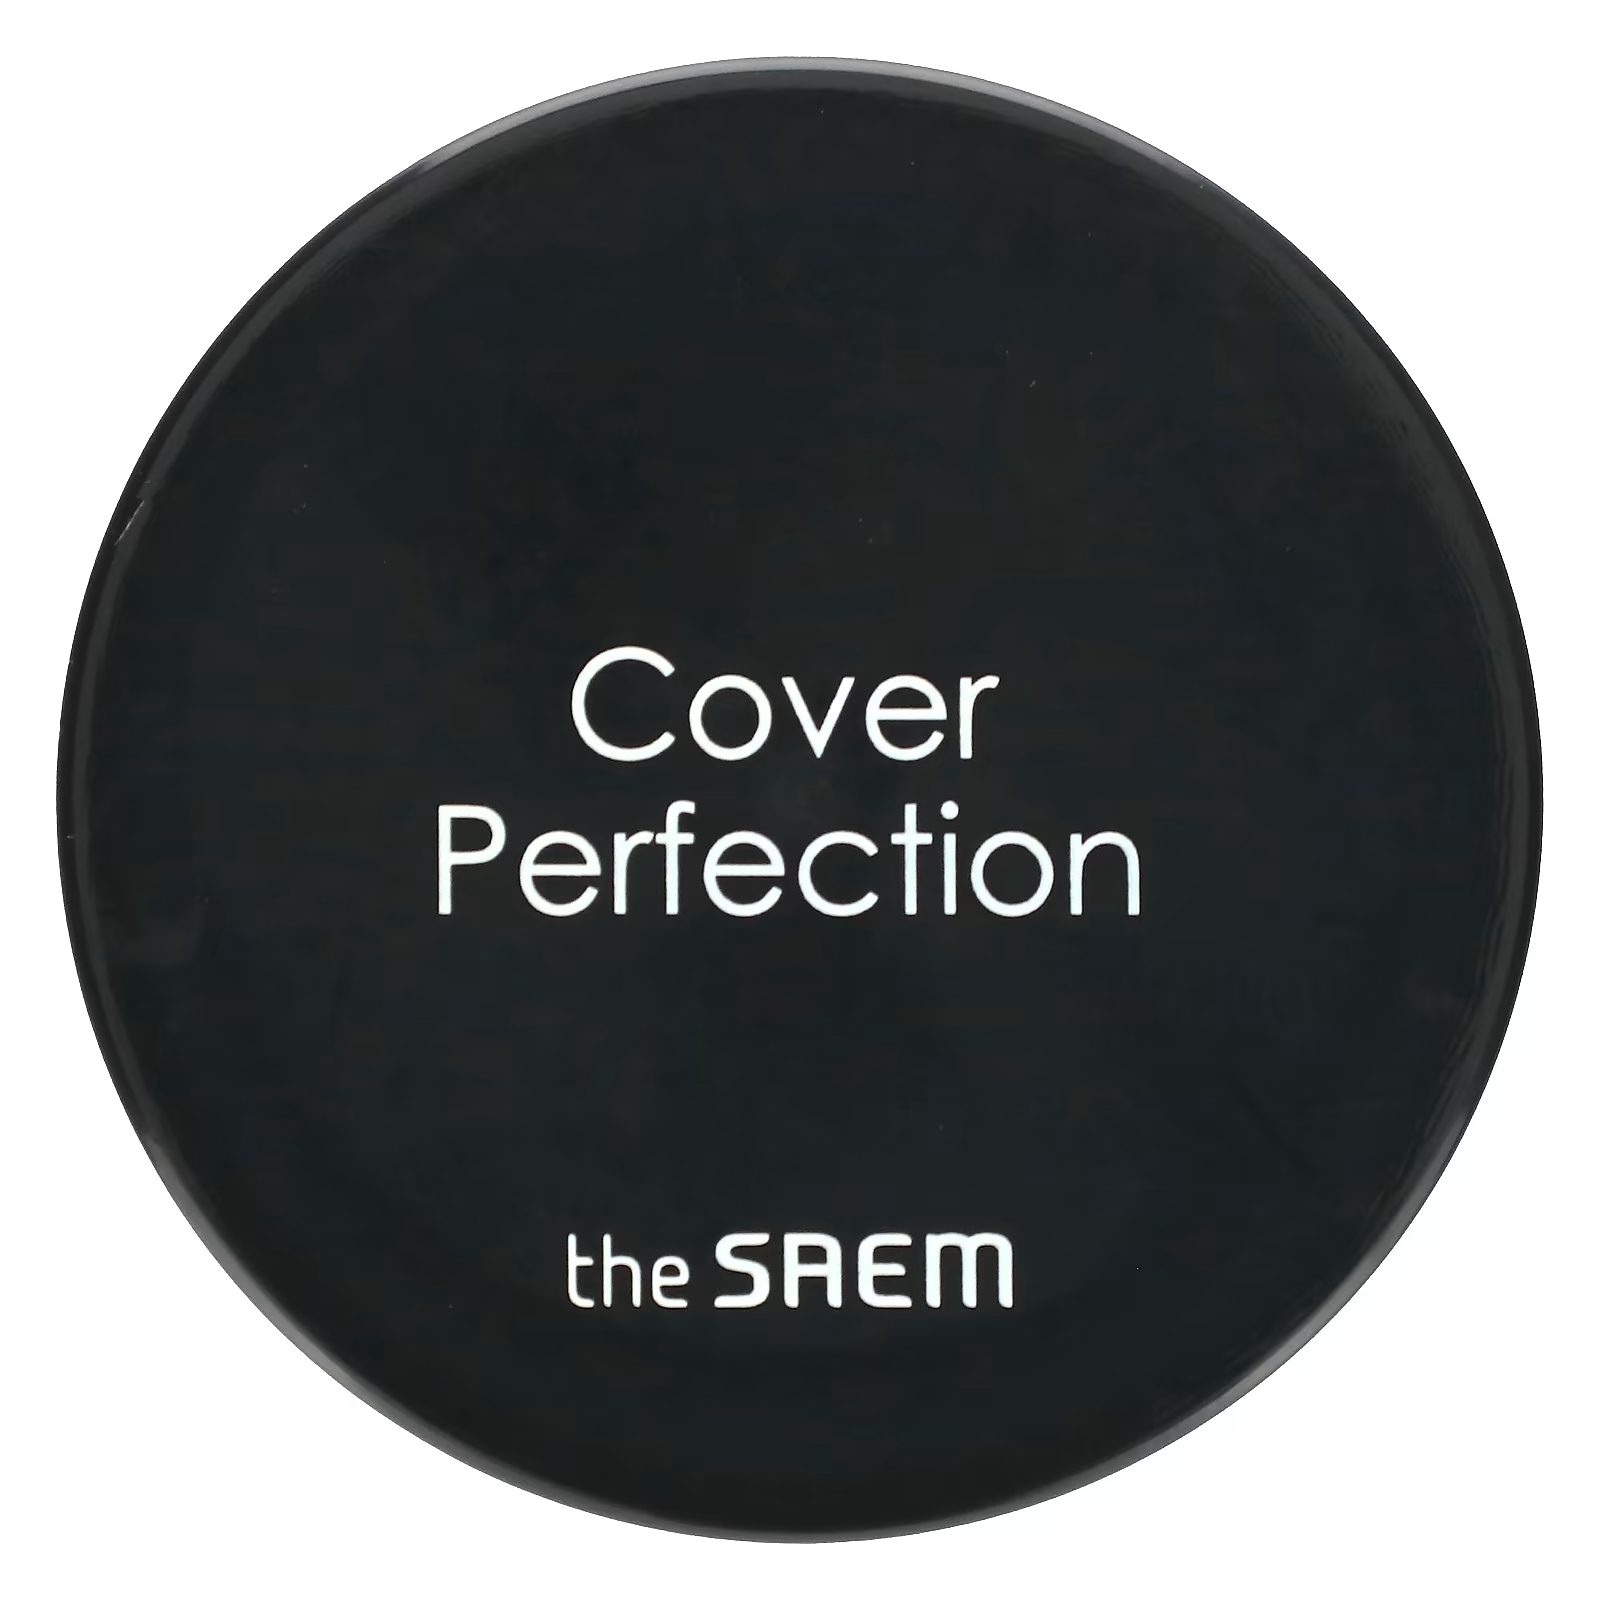 Бальзам-консилер The Saem Cover Perfection Pot Concealer 01 Clear Beige the saem cover perfection concealer pencil оттенок 01 clear beige